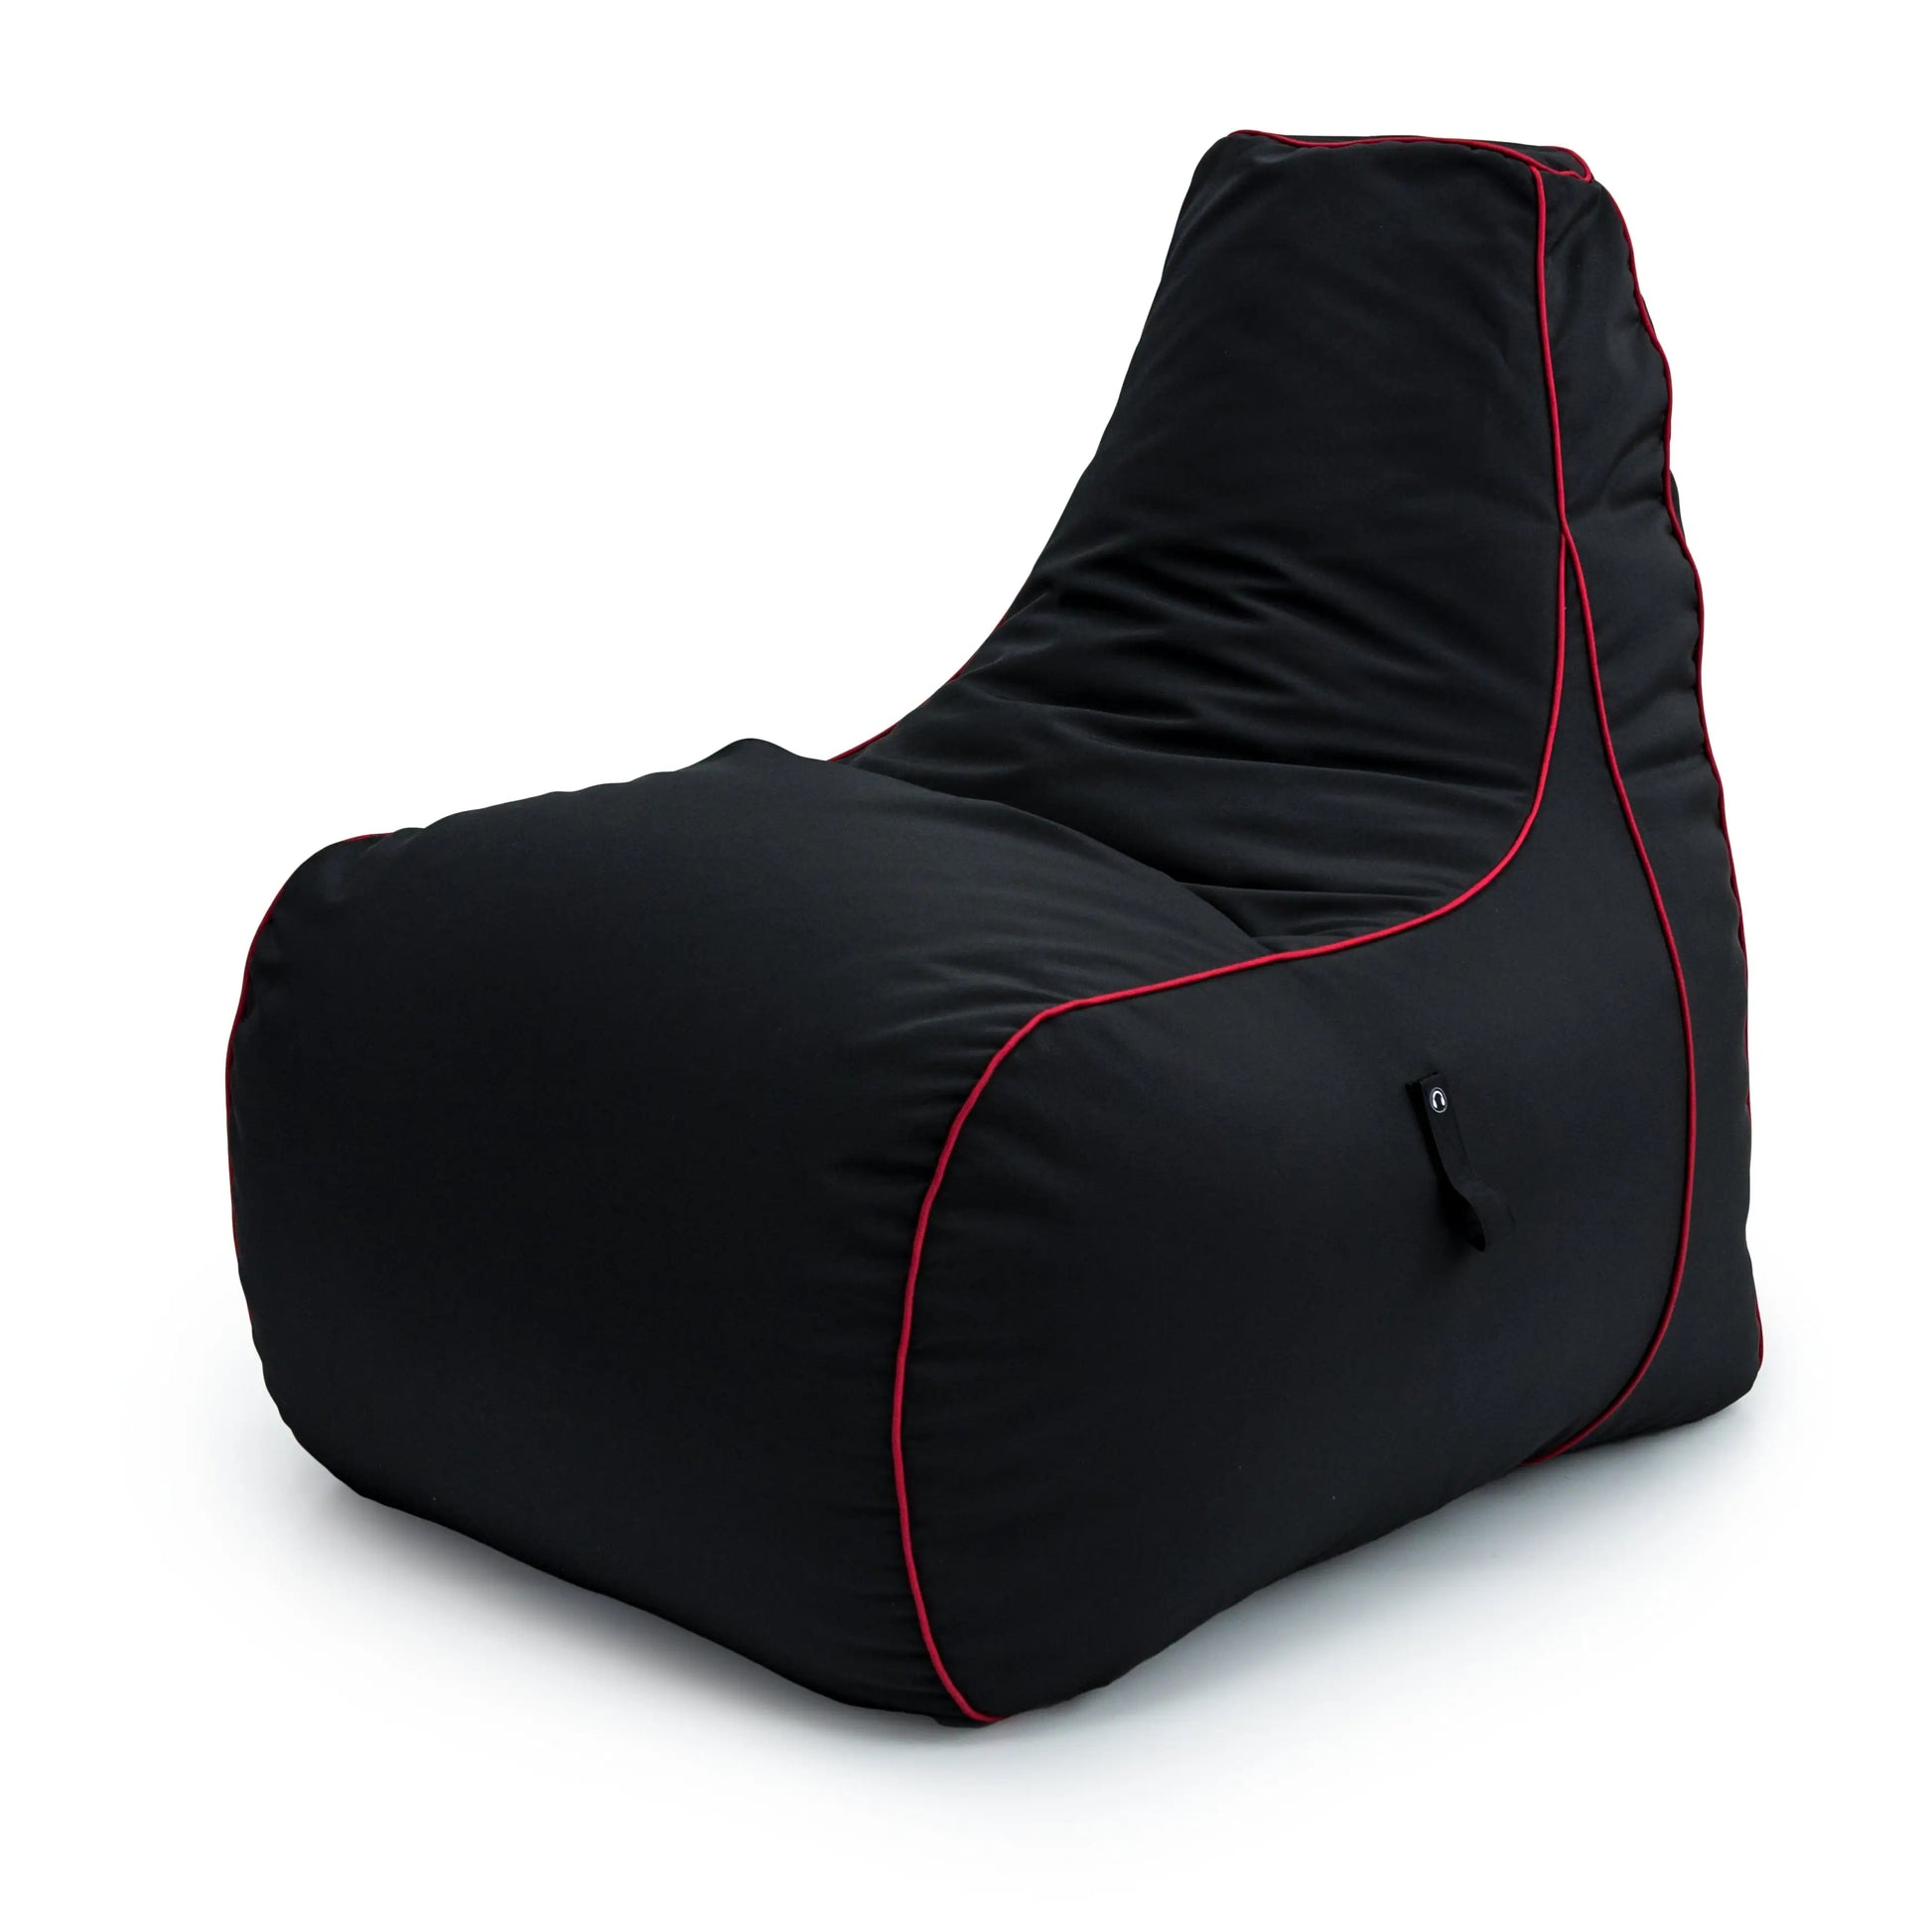 Bean bag chair for gaming or lounging